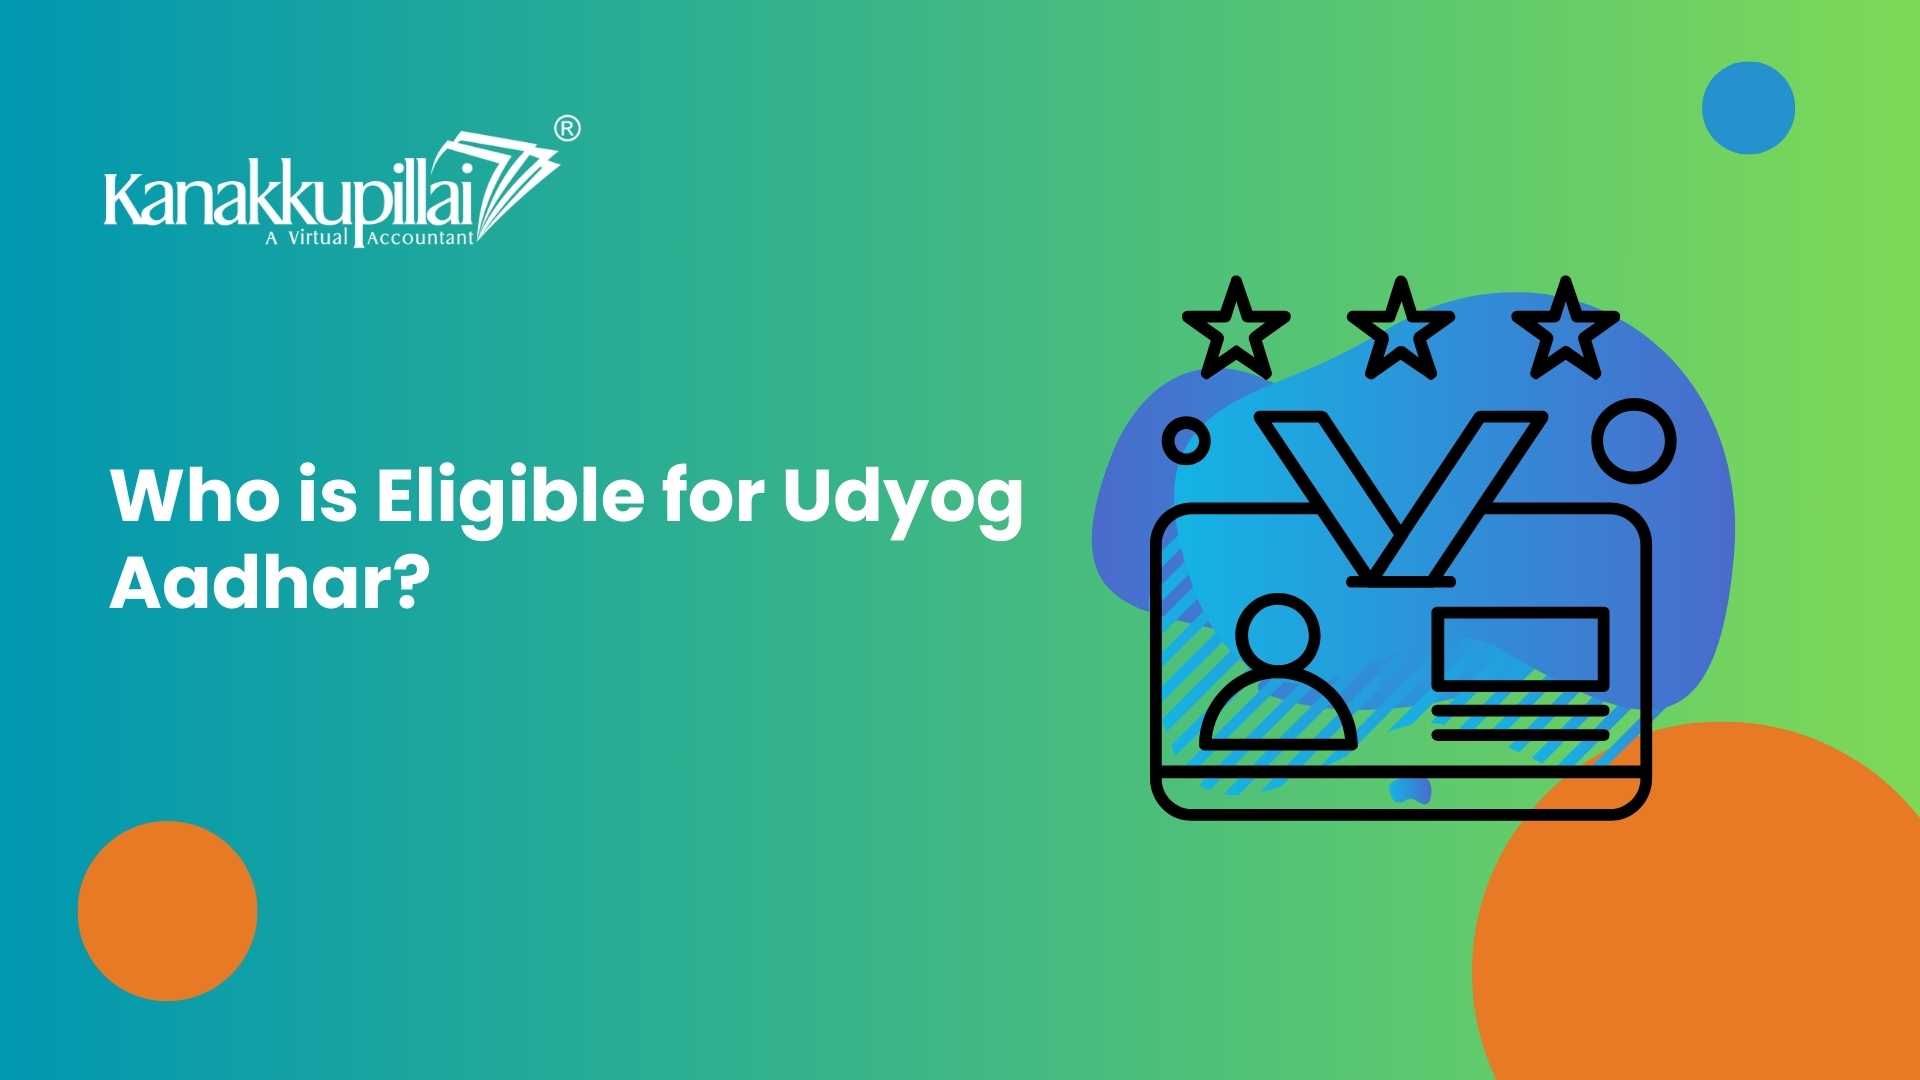 You are currently viewing Who is Eligible for Udyog Aadhar?